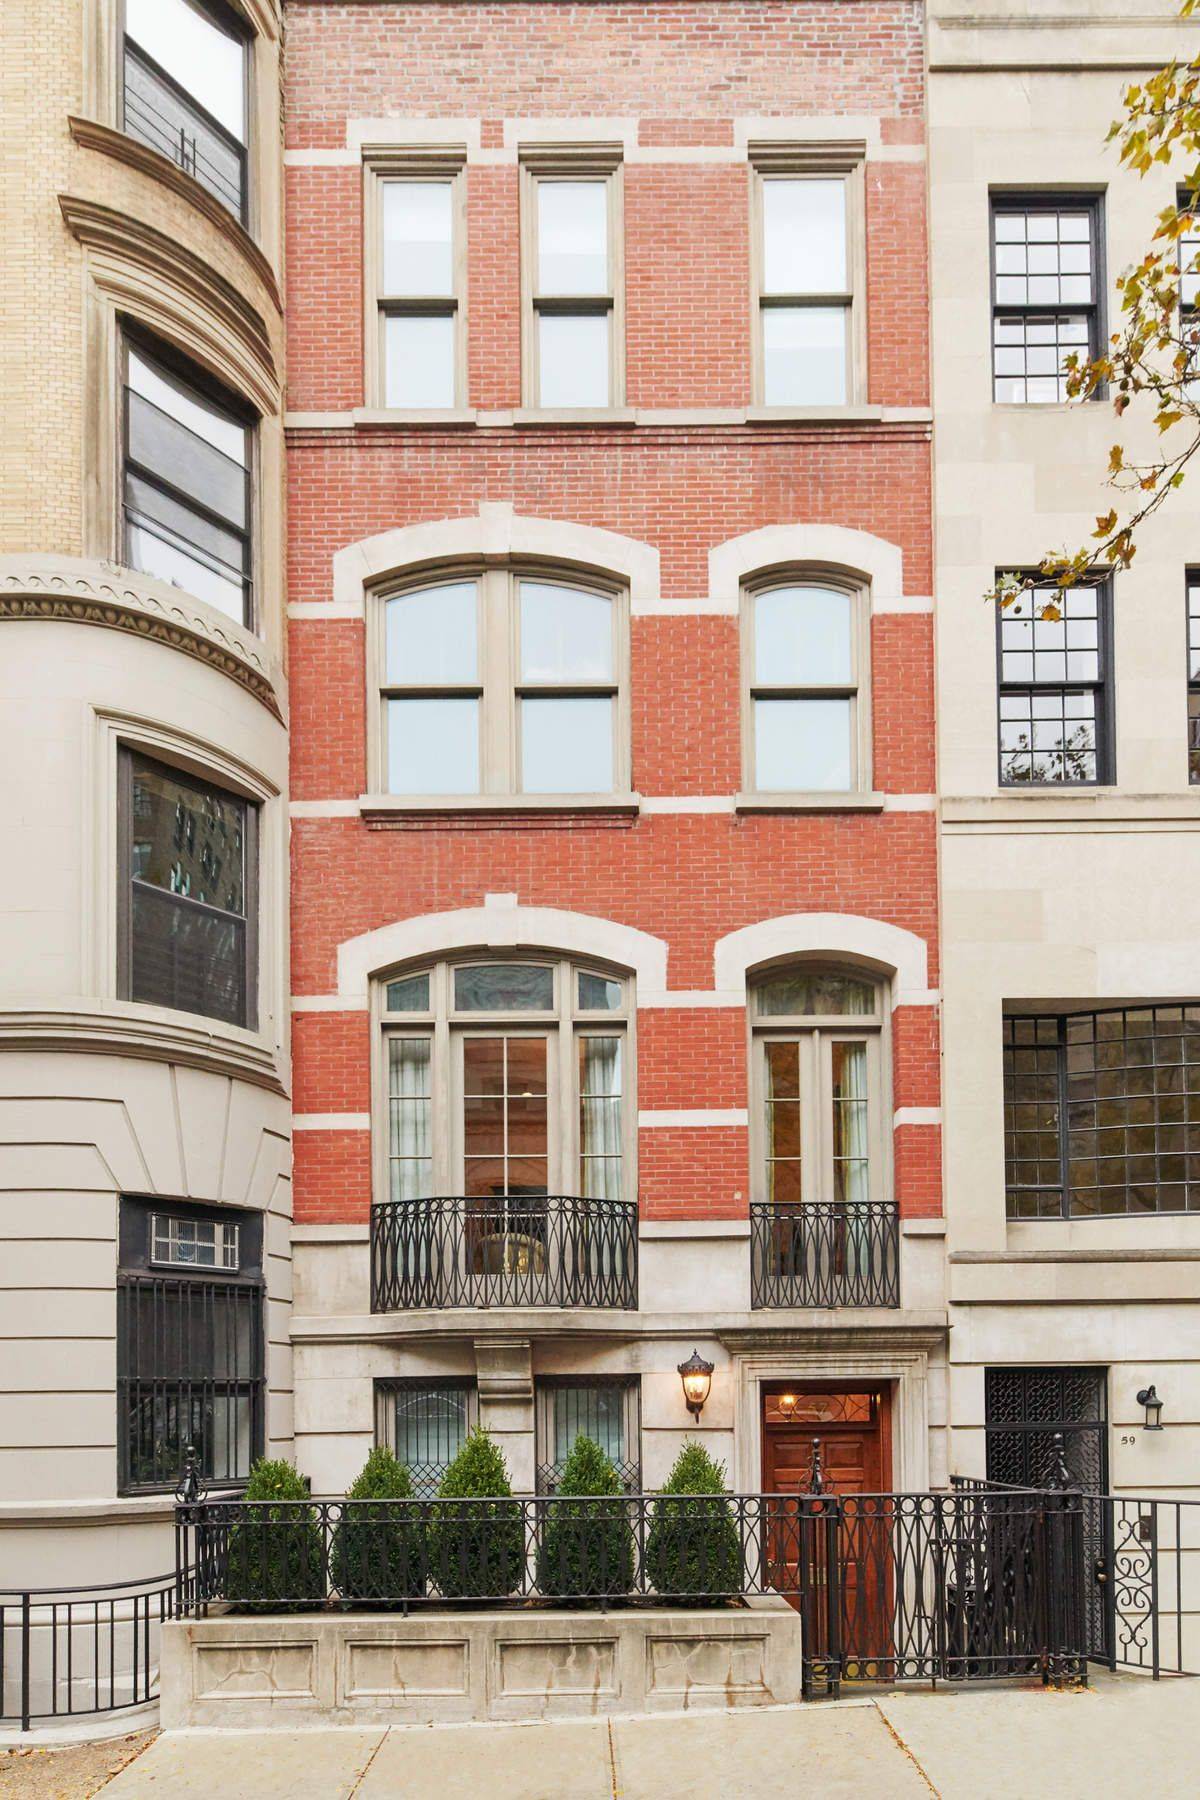 Situated on a superior block in Carnegie Hill, 57 East 93rd Street offers 5, 000 square feet of both grand and comfortable townhouse living.